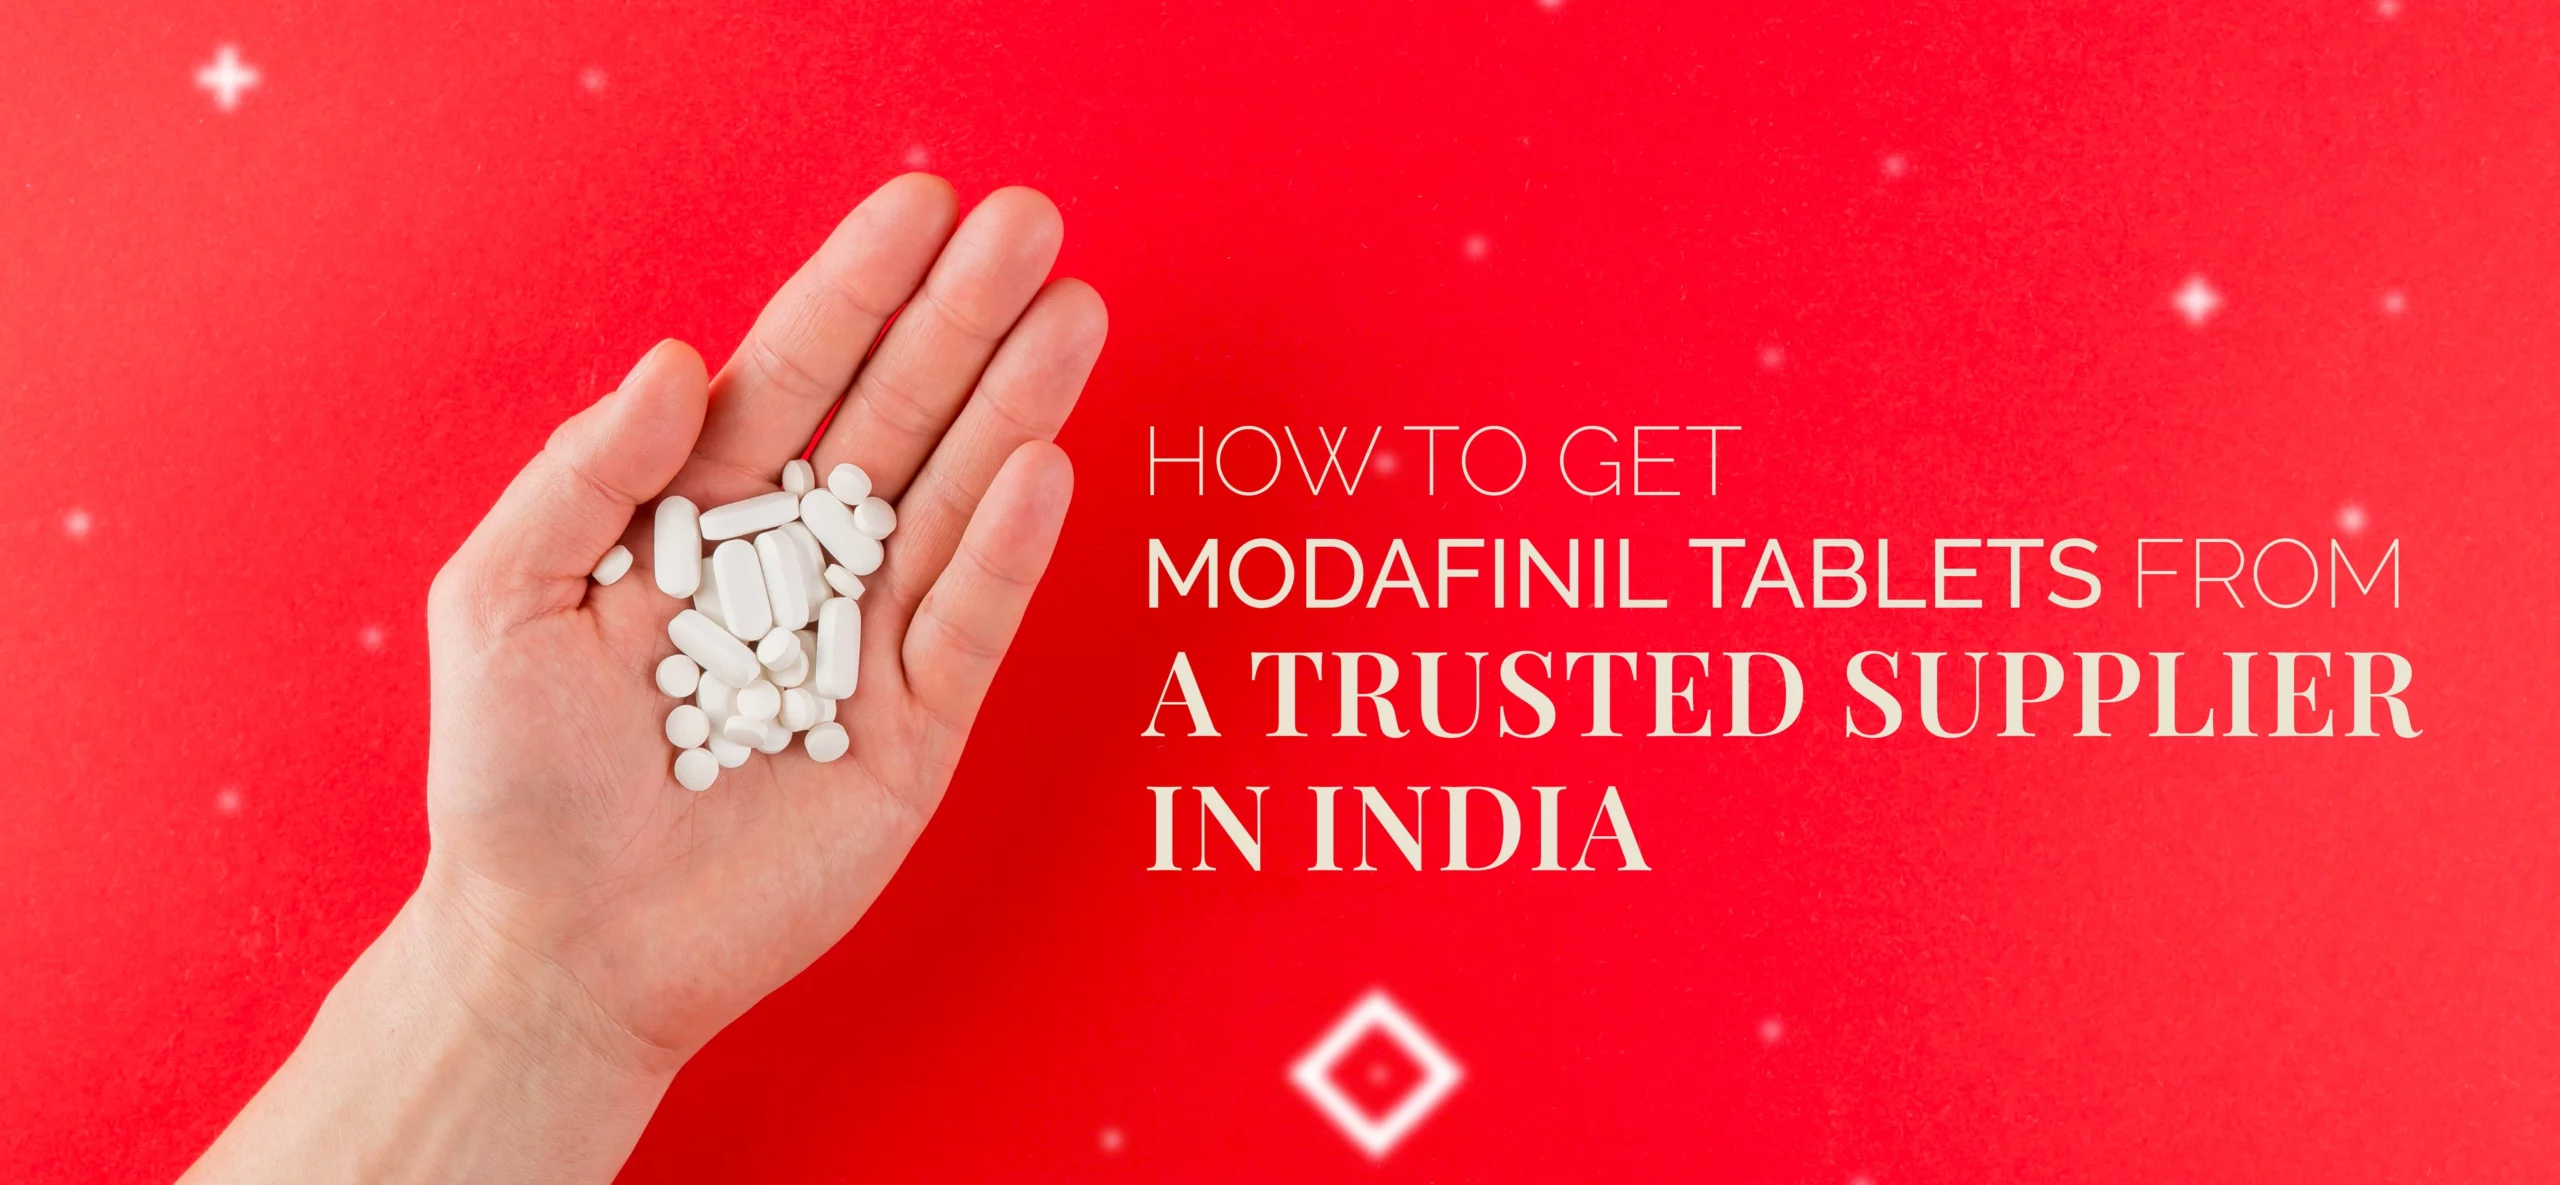 How_to_get_madafill_tablet_from_a_trusted_supplier-min-scaled